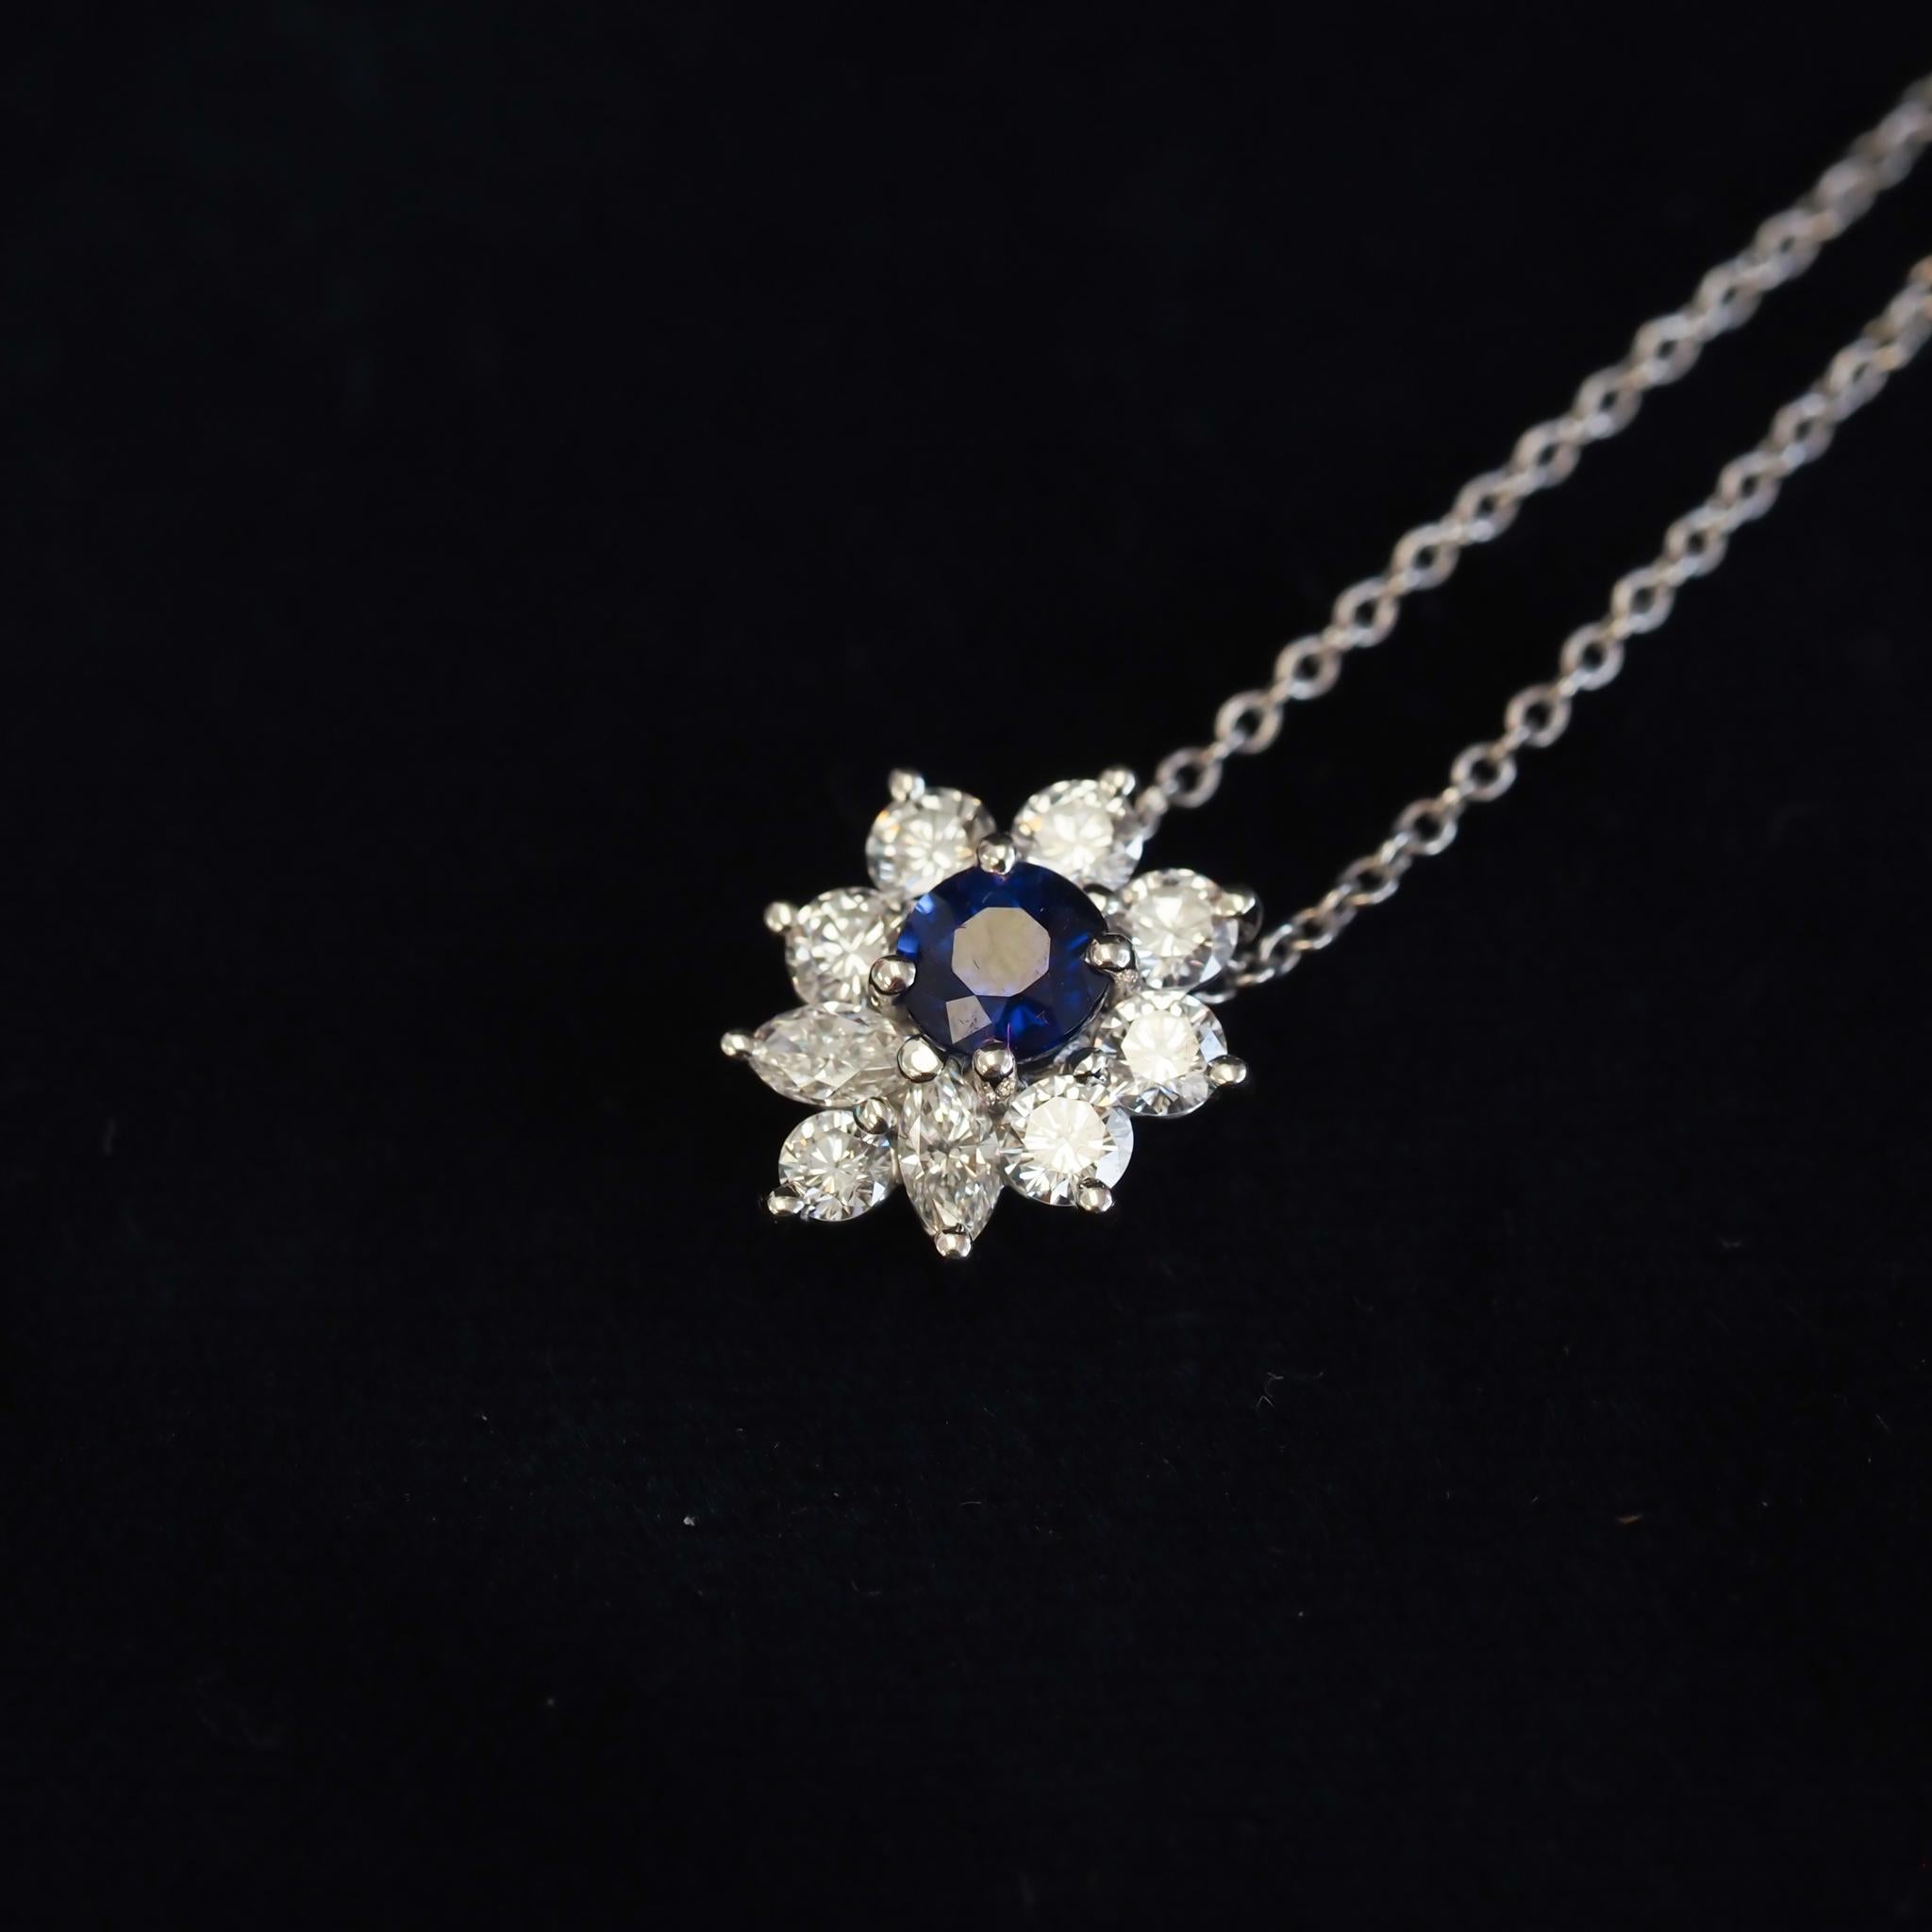 Finely detailed pre owned Tiffany & Co Victoria necklace, crafted in 950 platinum.
9 round brilliant and marquise cut diamonds total an estimated 0.53 carats (estimated at F-G color and VVS clarity).
The round cut sapphire measures 4mm and is